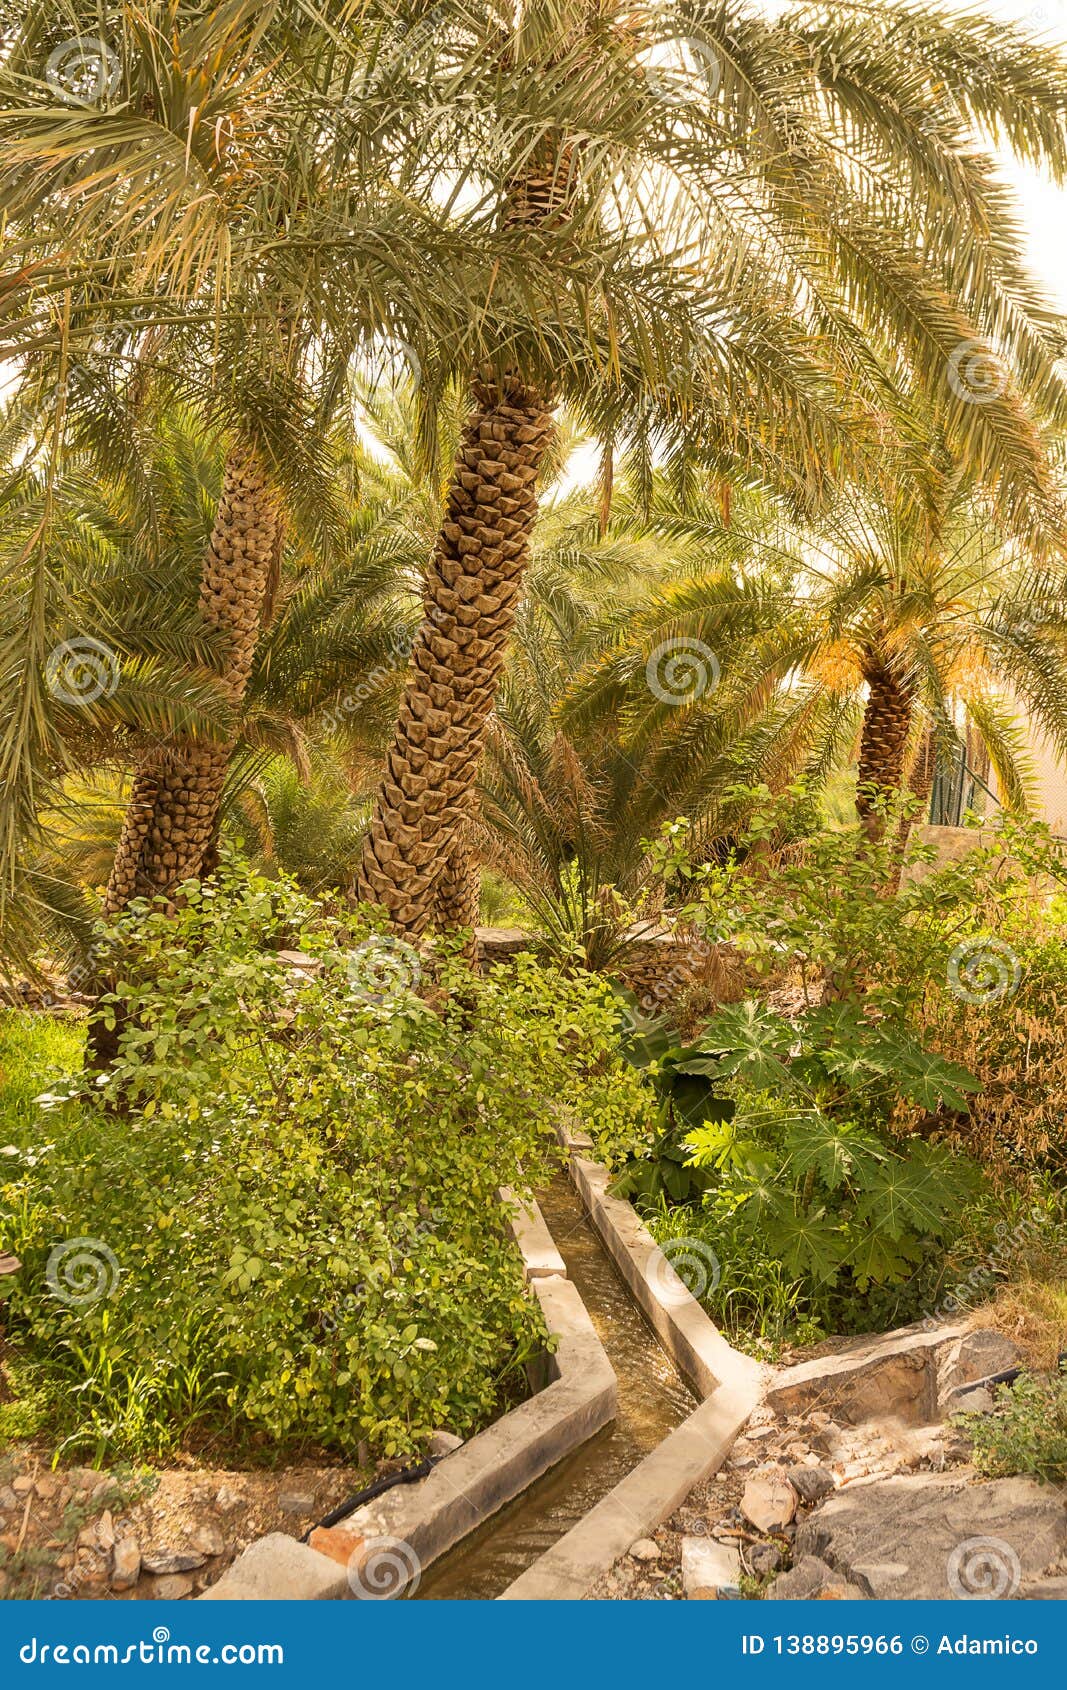 water channeling in the oasis of date palms in the village of misfat al abriyyin